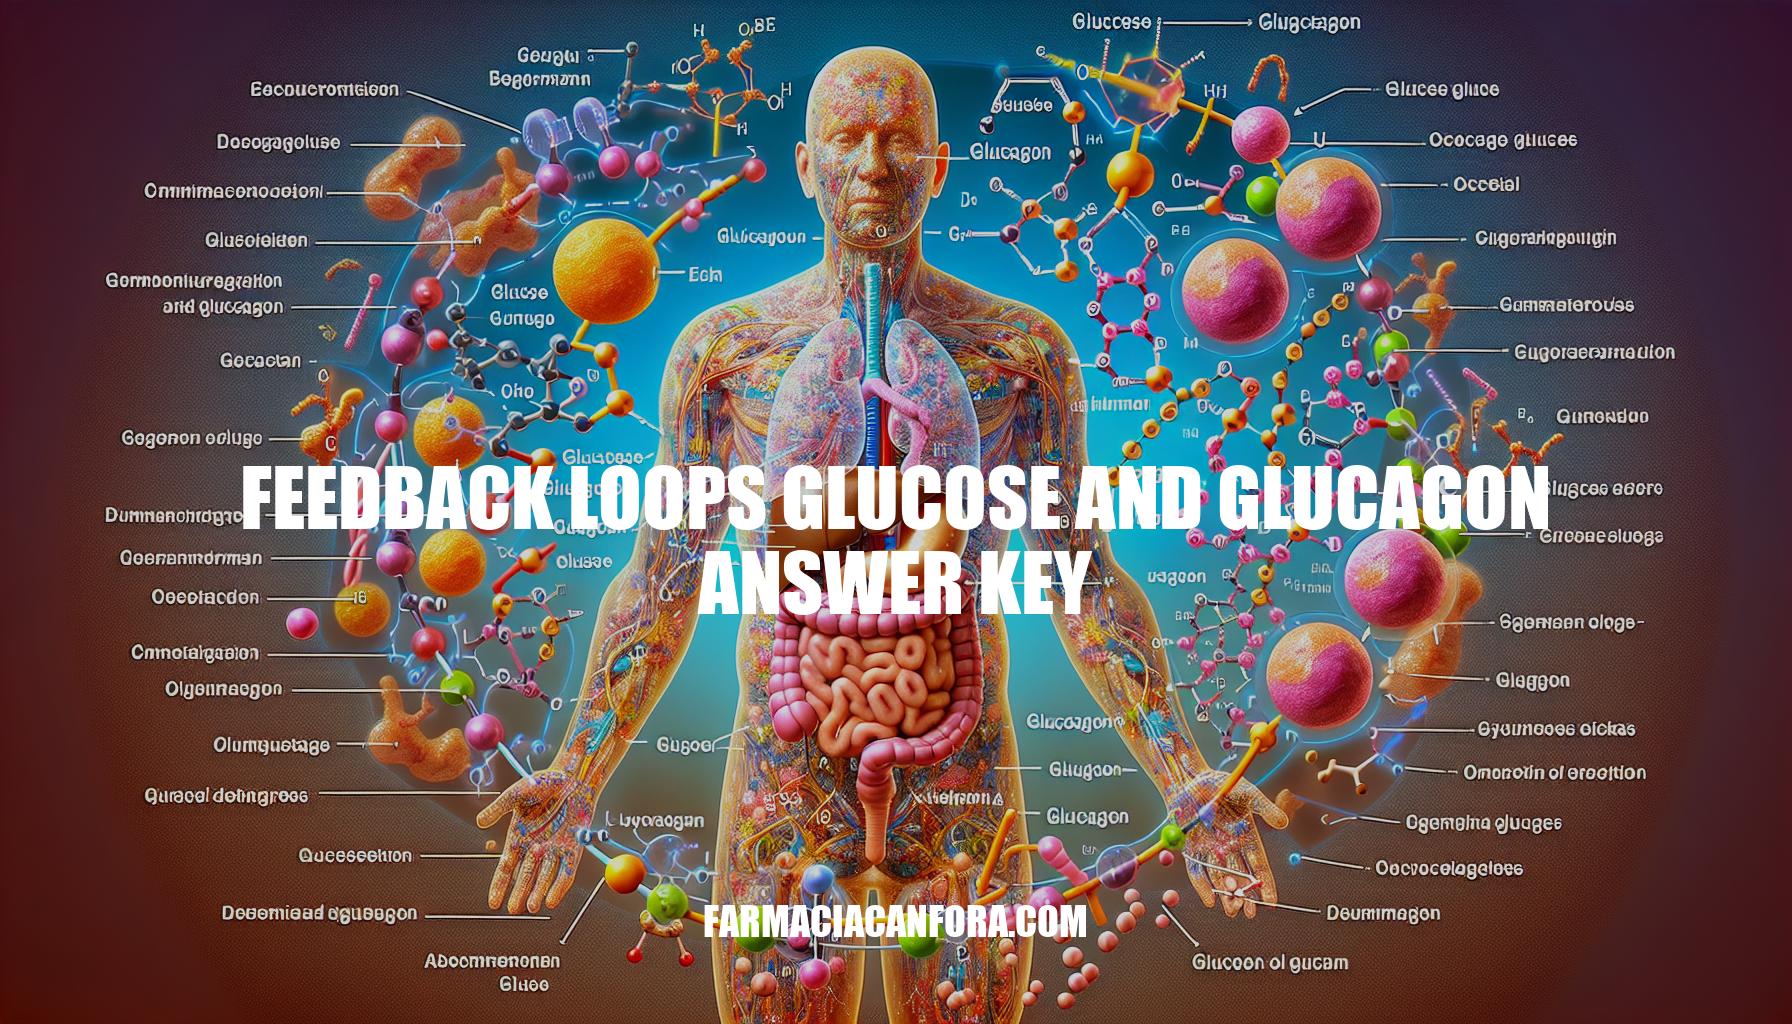 Understanding Feedback Loops of Glucose and Glucagon: Answer Key